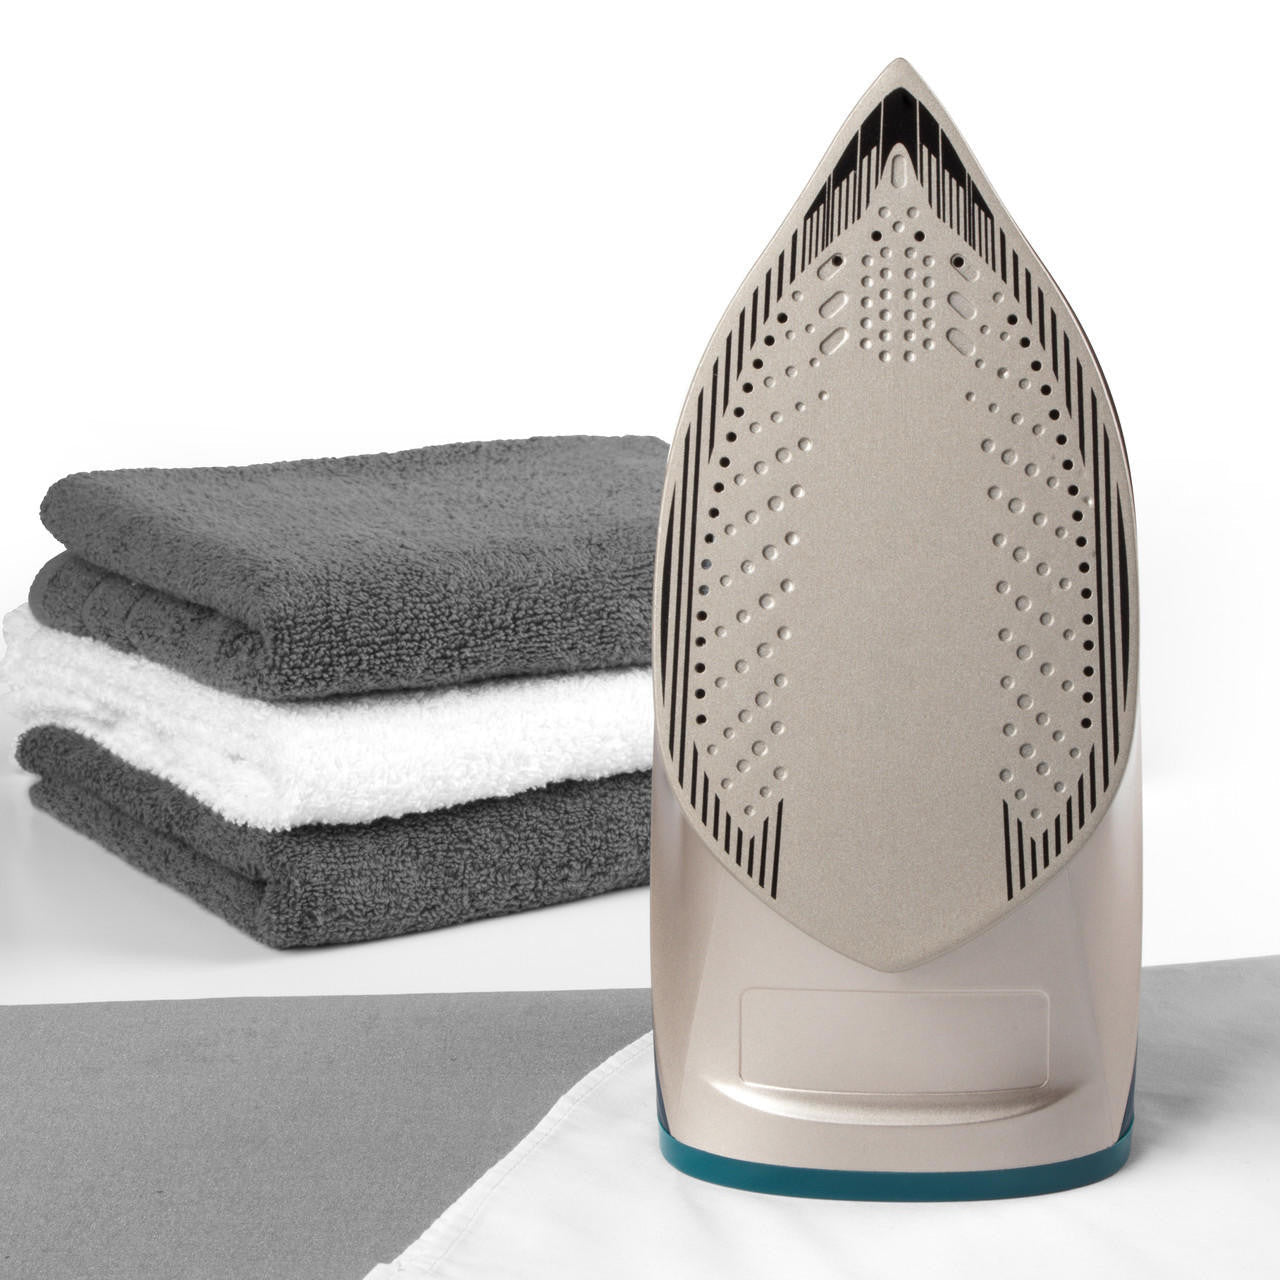 Beldray BEL01480-150 Duo Glide Steam Iron 2200W White Gold - Premium Steam Irons from Beldray - Just $19.99! Shop now at W Hurst & Son (IW) Ltd